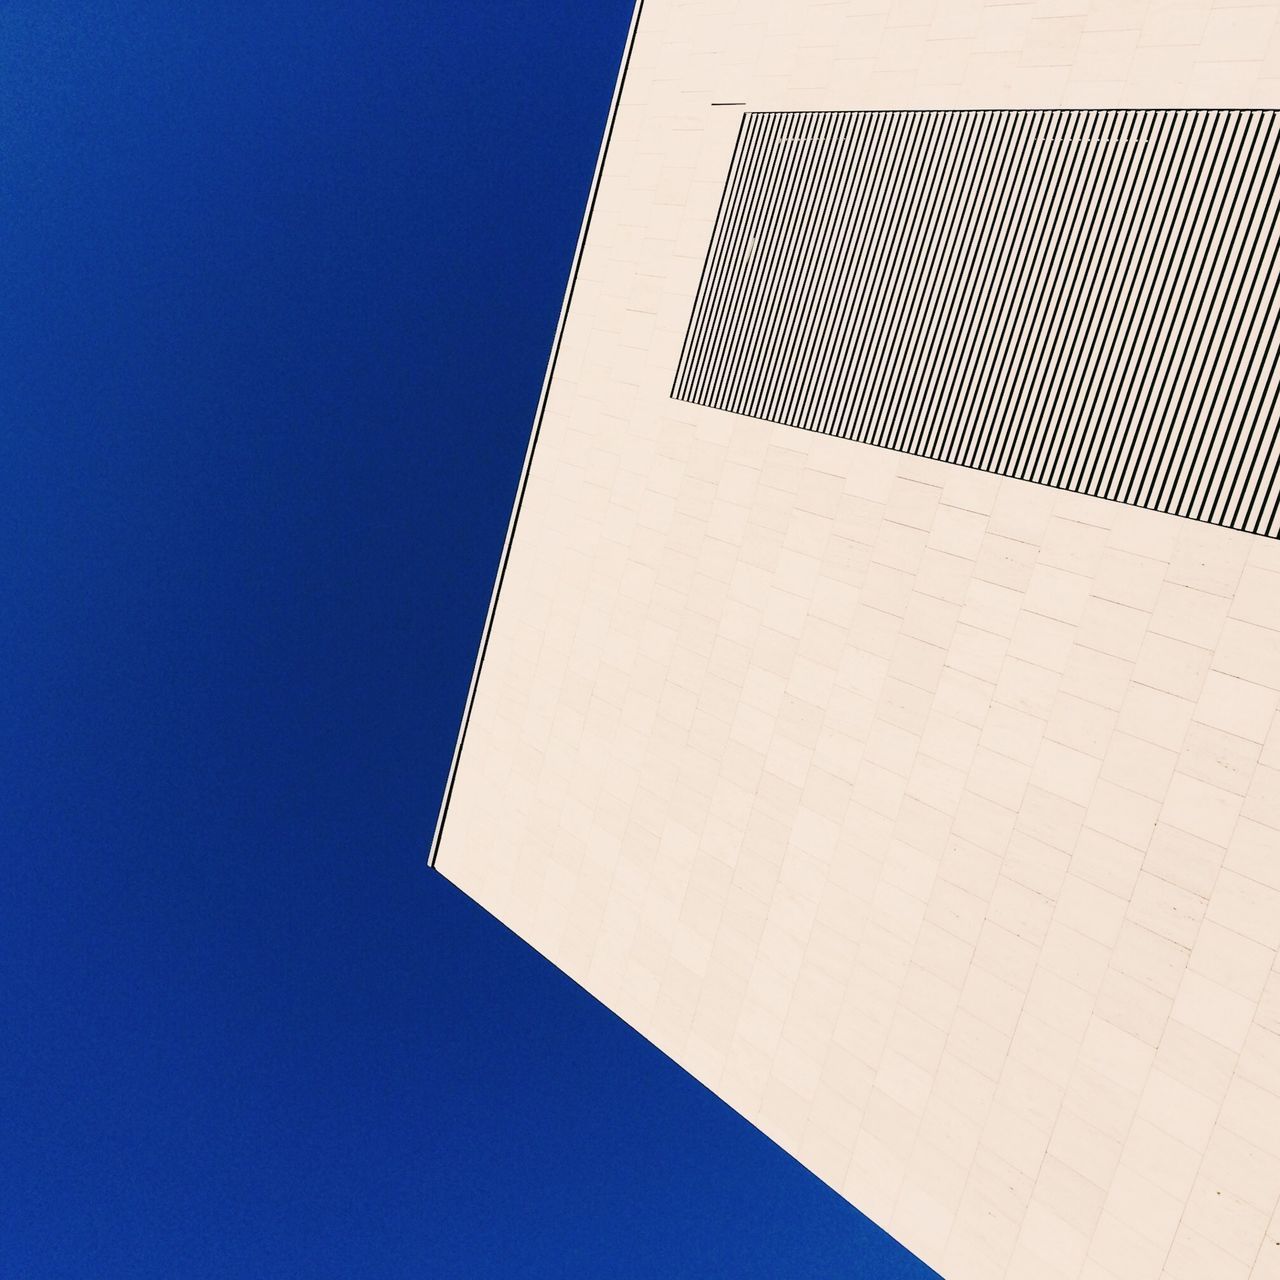 clear sky, low angle view, architecture, copy space, built structure, pattern, modern, building exterior, tower, design, blue, no people, tall - high, paper, part of, shadow, day, close-up, triangle shape, sunlight